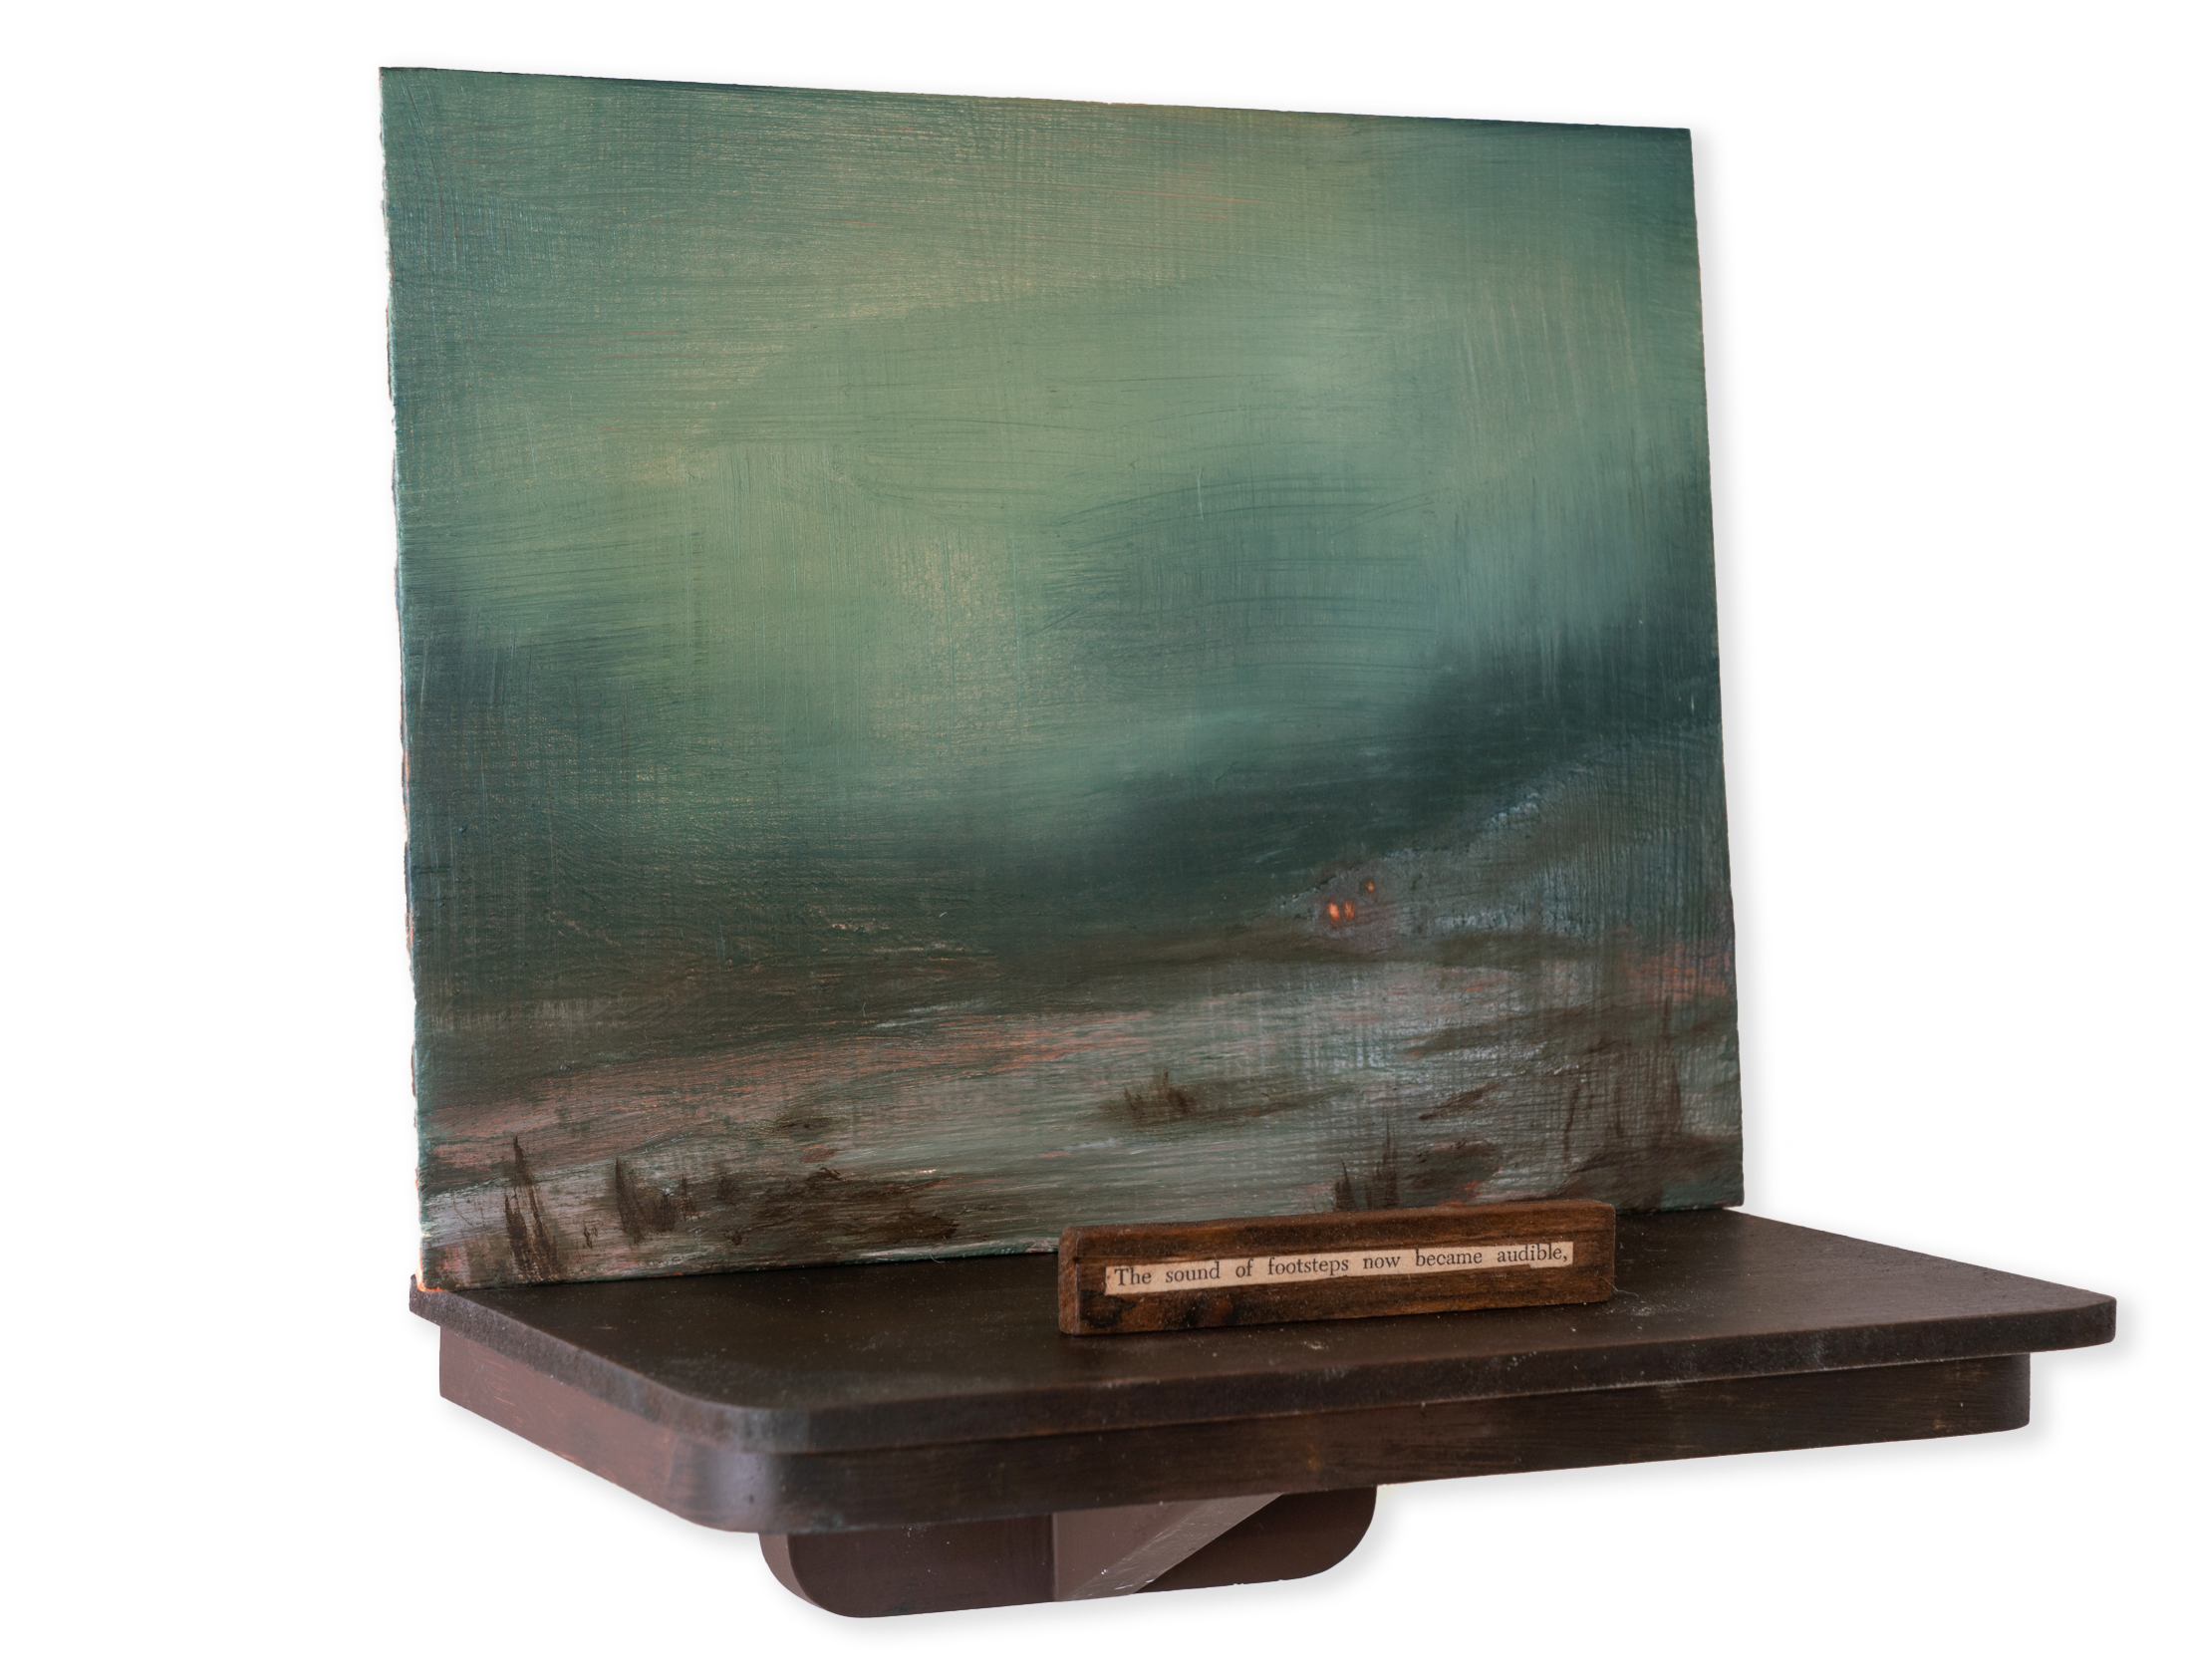 Color image of an oil painting on wooden panel depicting an empty filed at night perched on a shelf with text reading "The sound of footsteps now became audible"